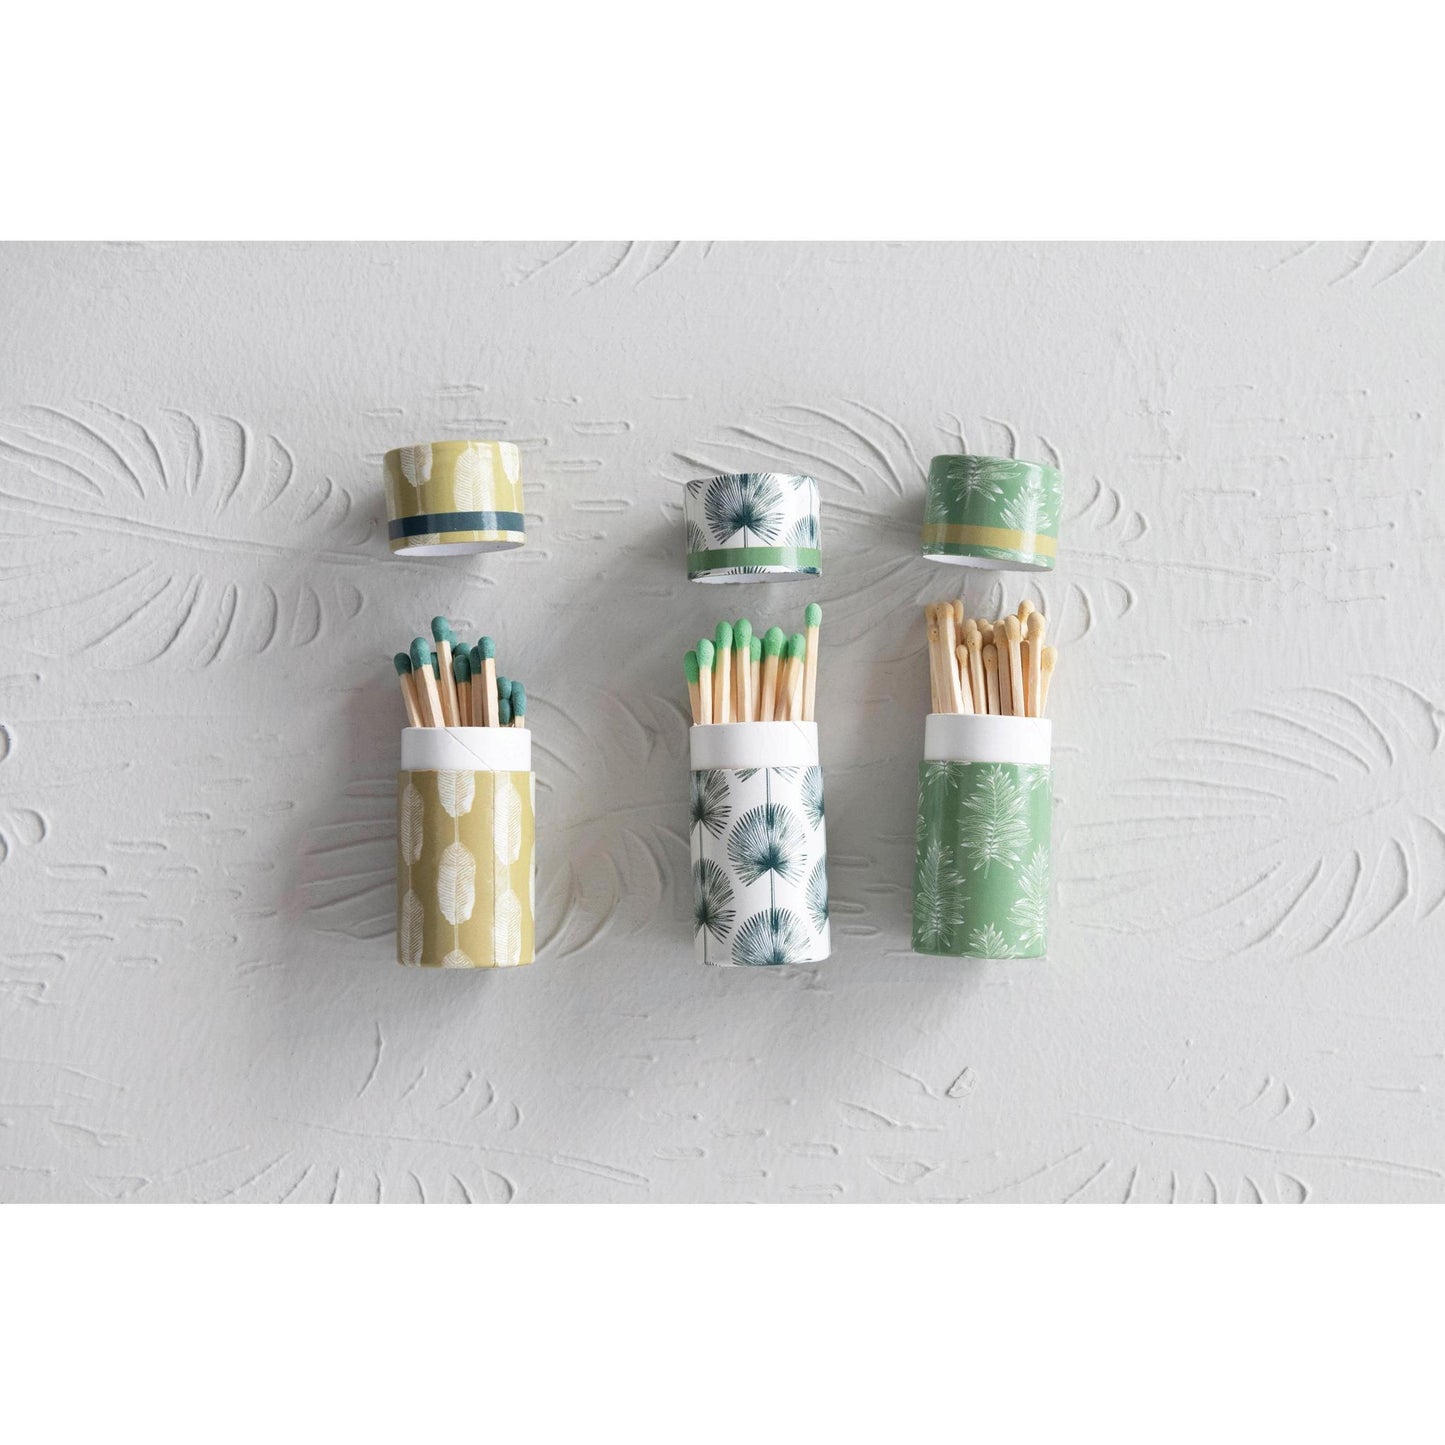 Safety Matches in Tube Matchbox - Leaves